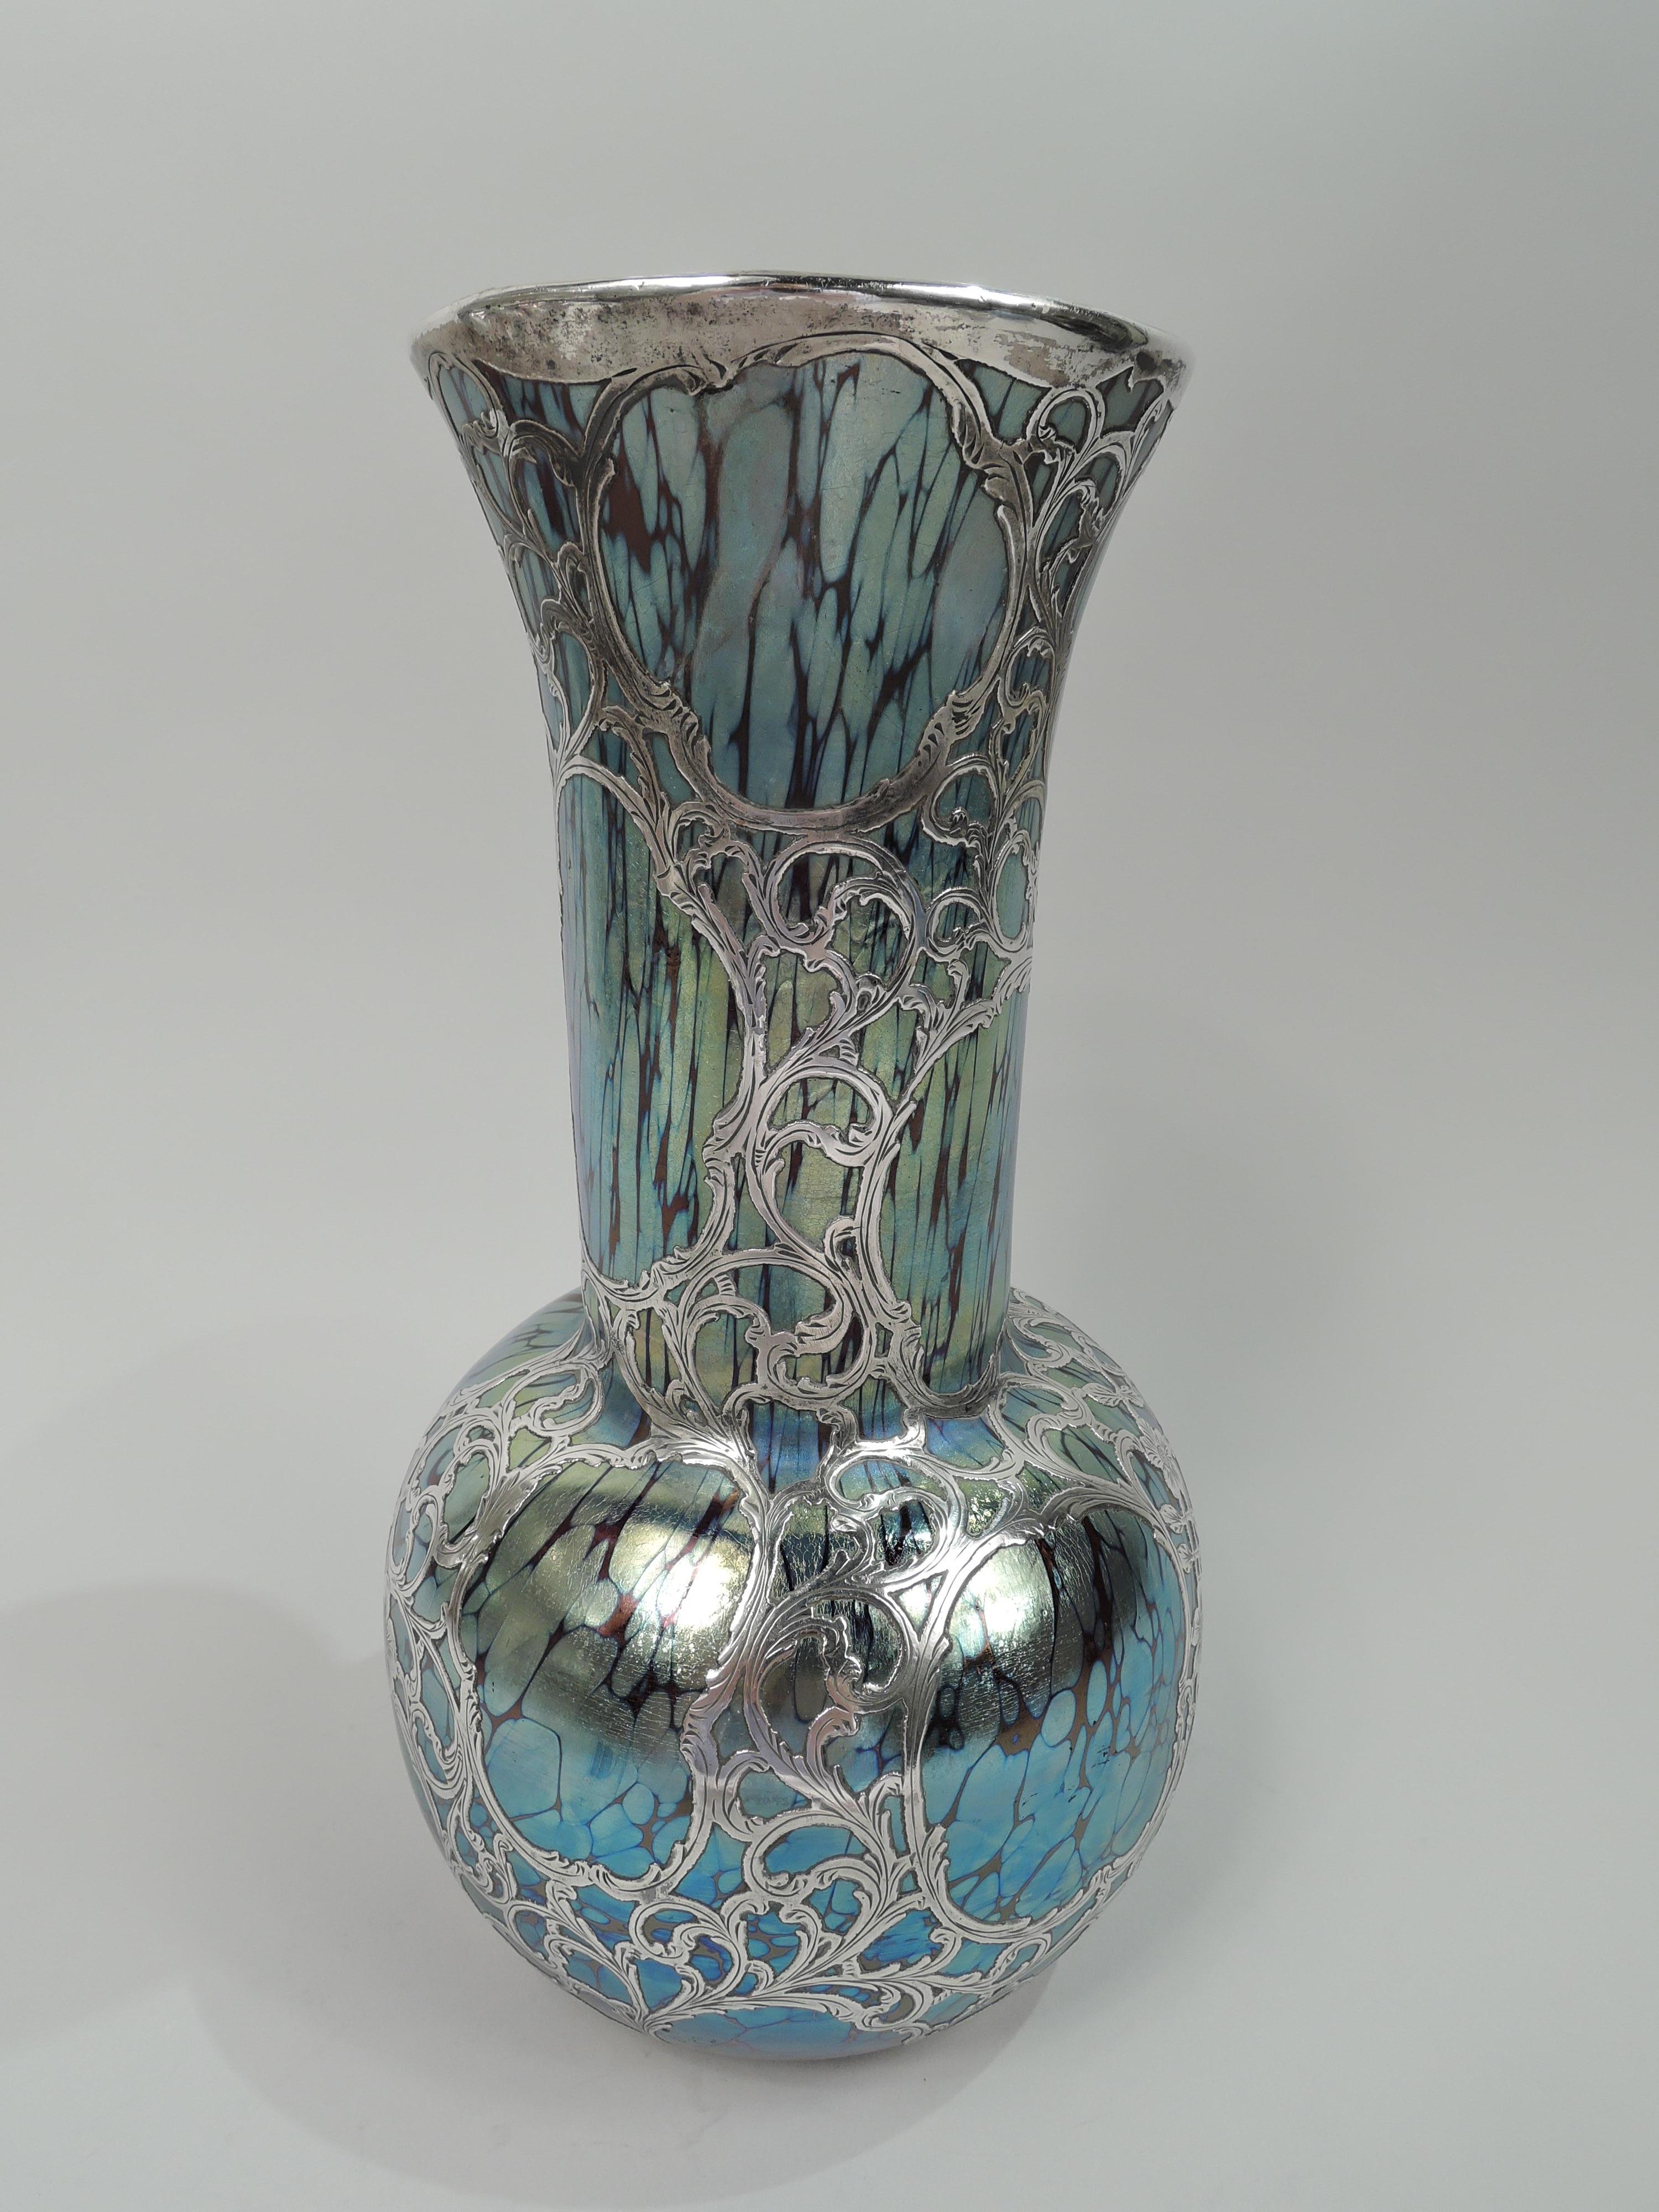 Turn-of-the-century Art Nouveau glass vase by historic Loetz with engraved silver overlay. Globular with tall cylindrical neck and gently flared rim. Overlay in form of dense leafing and flowering scroll pattern with open scrolled cartouches. Solid